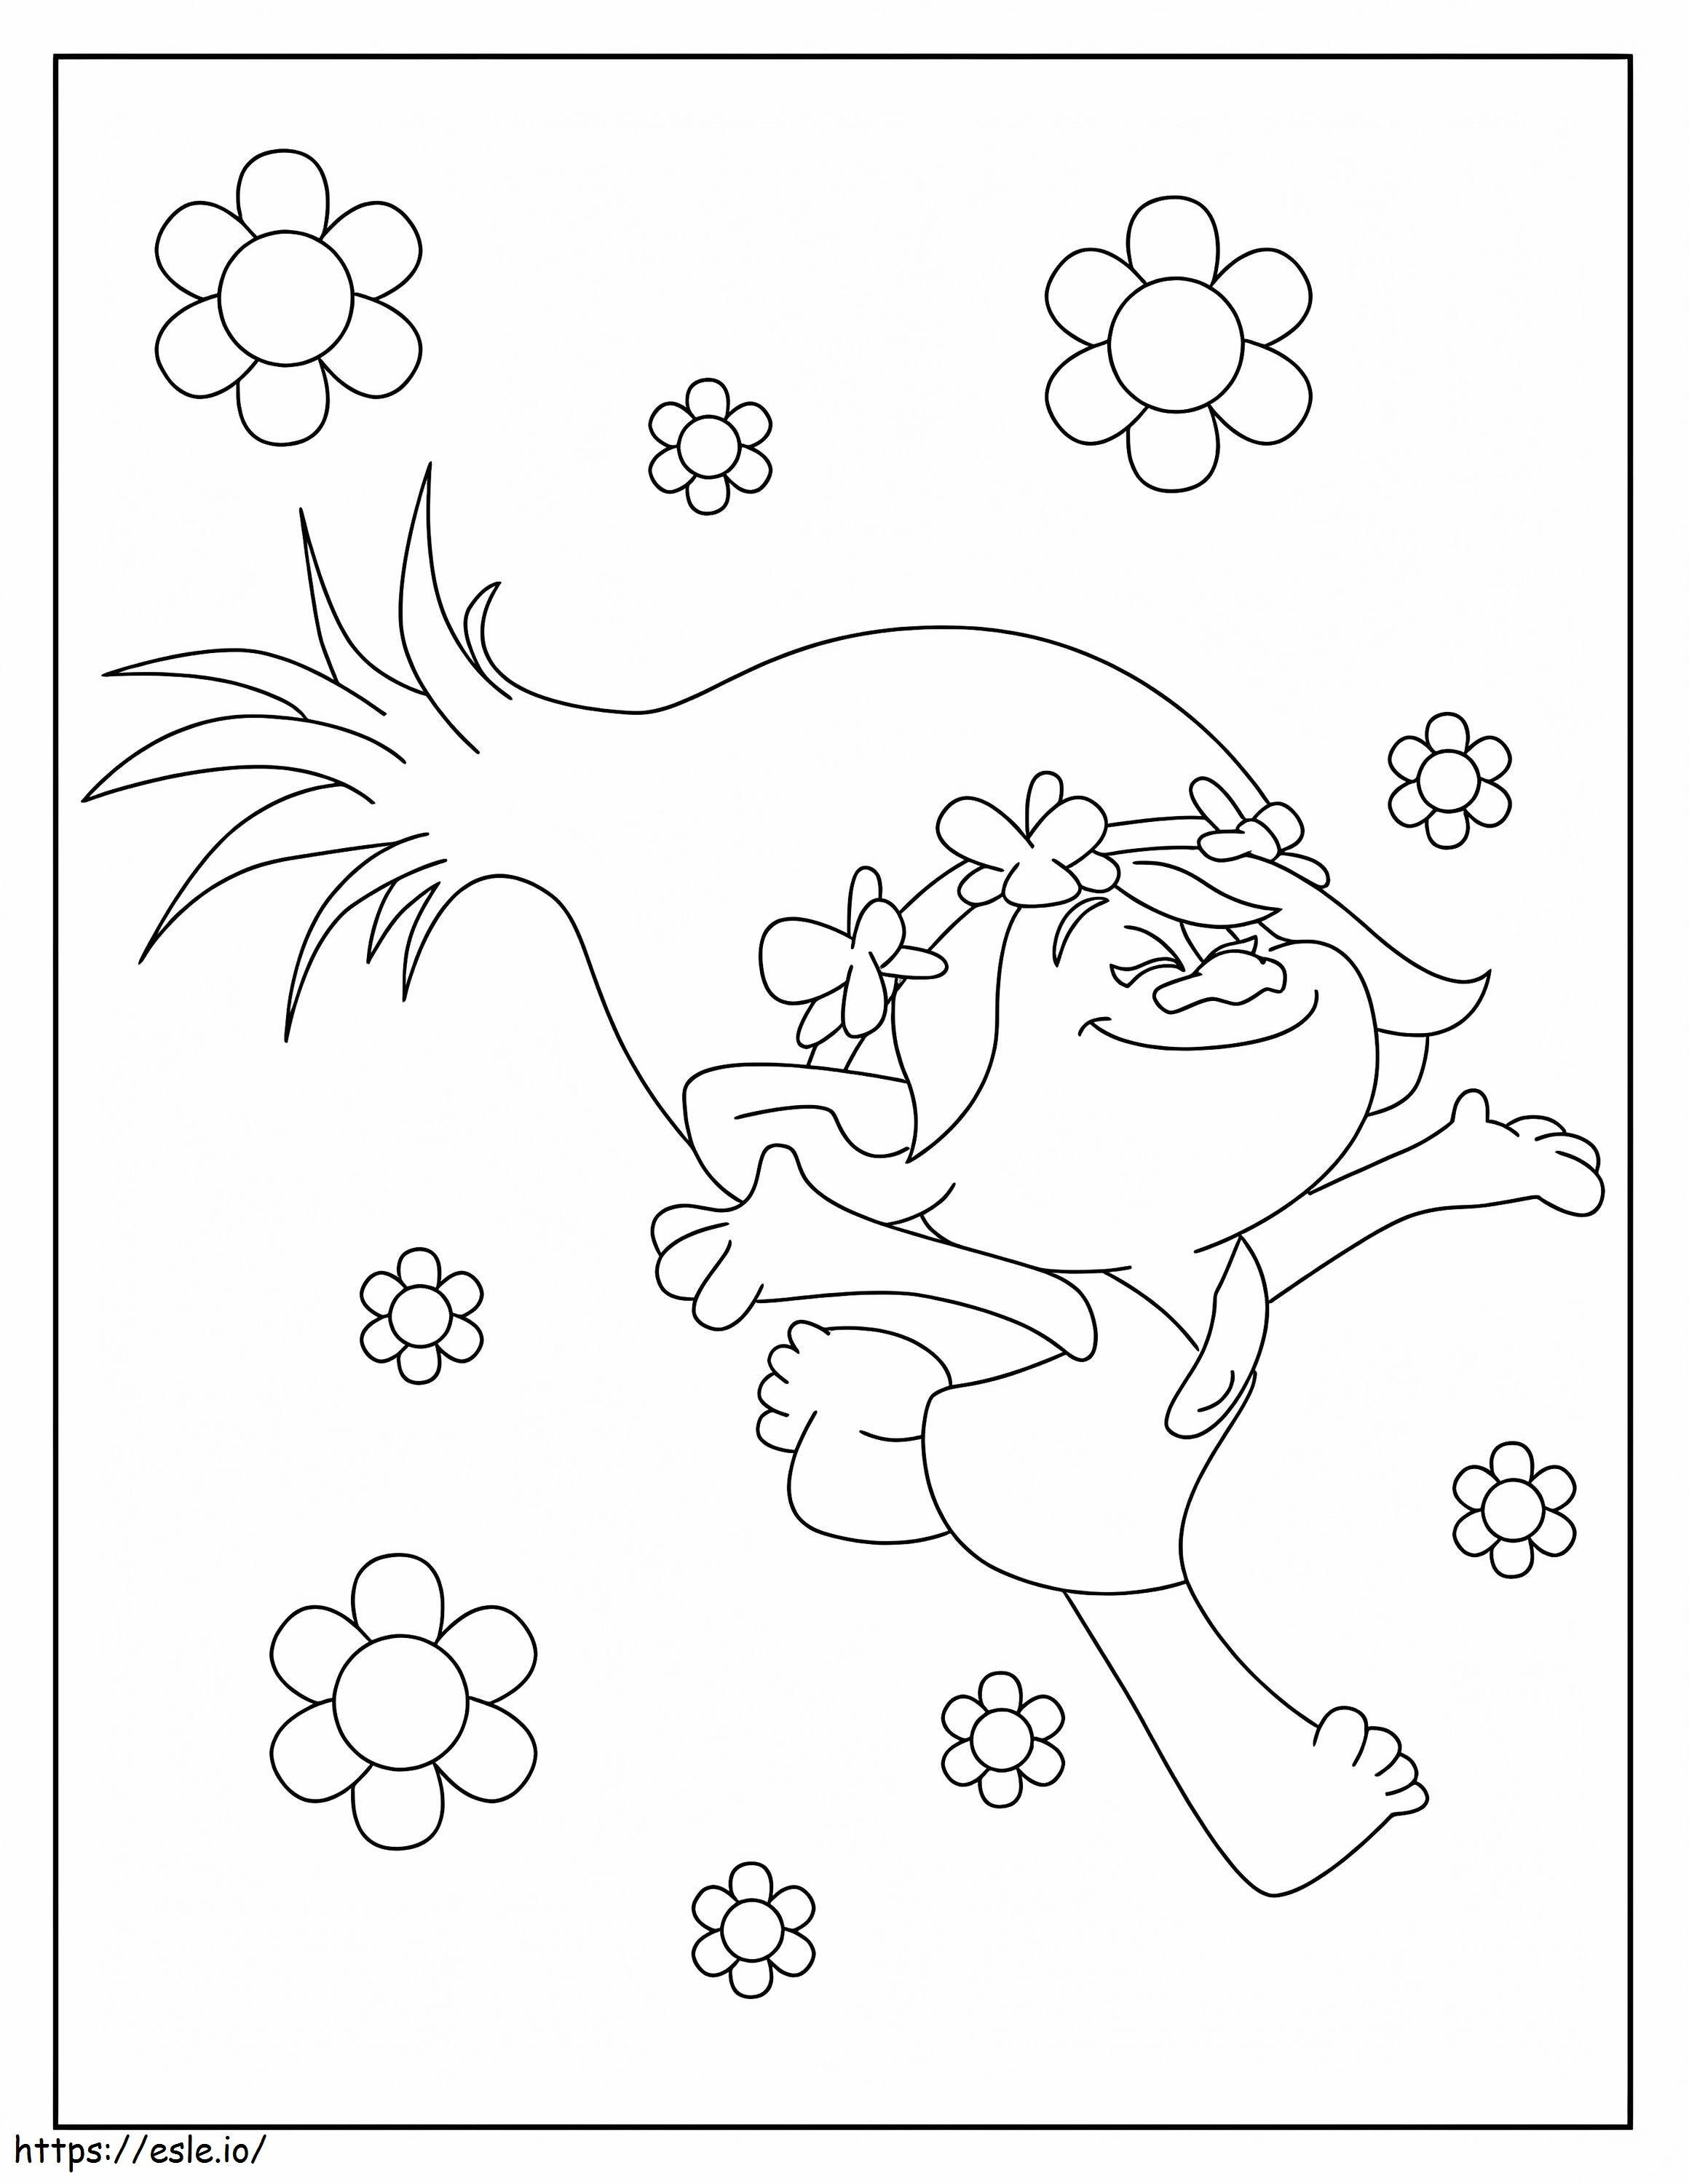 Running Poppy coloring page